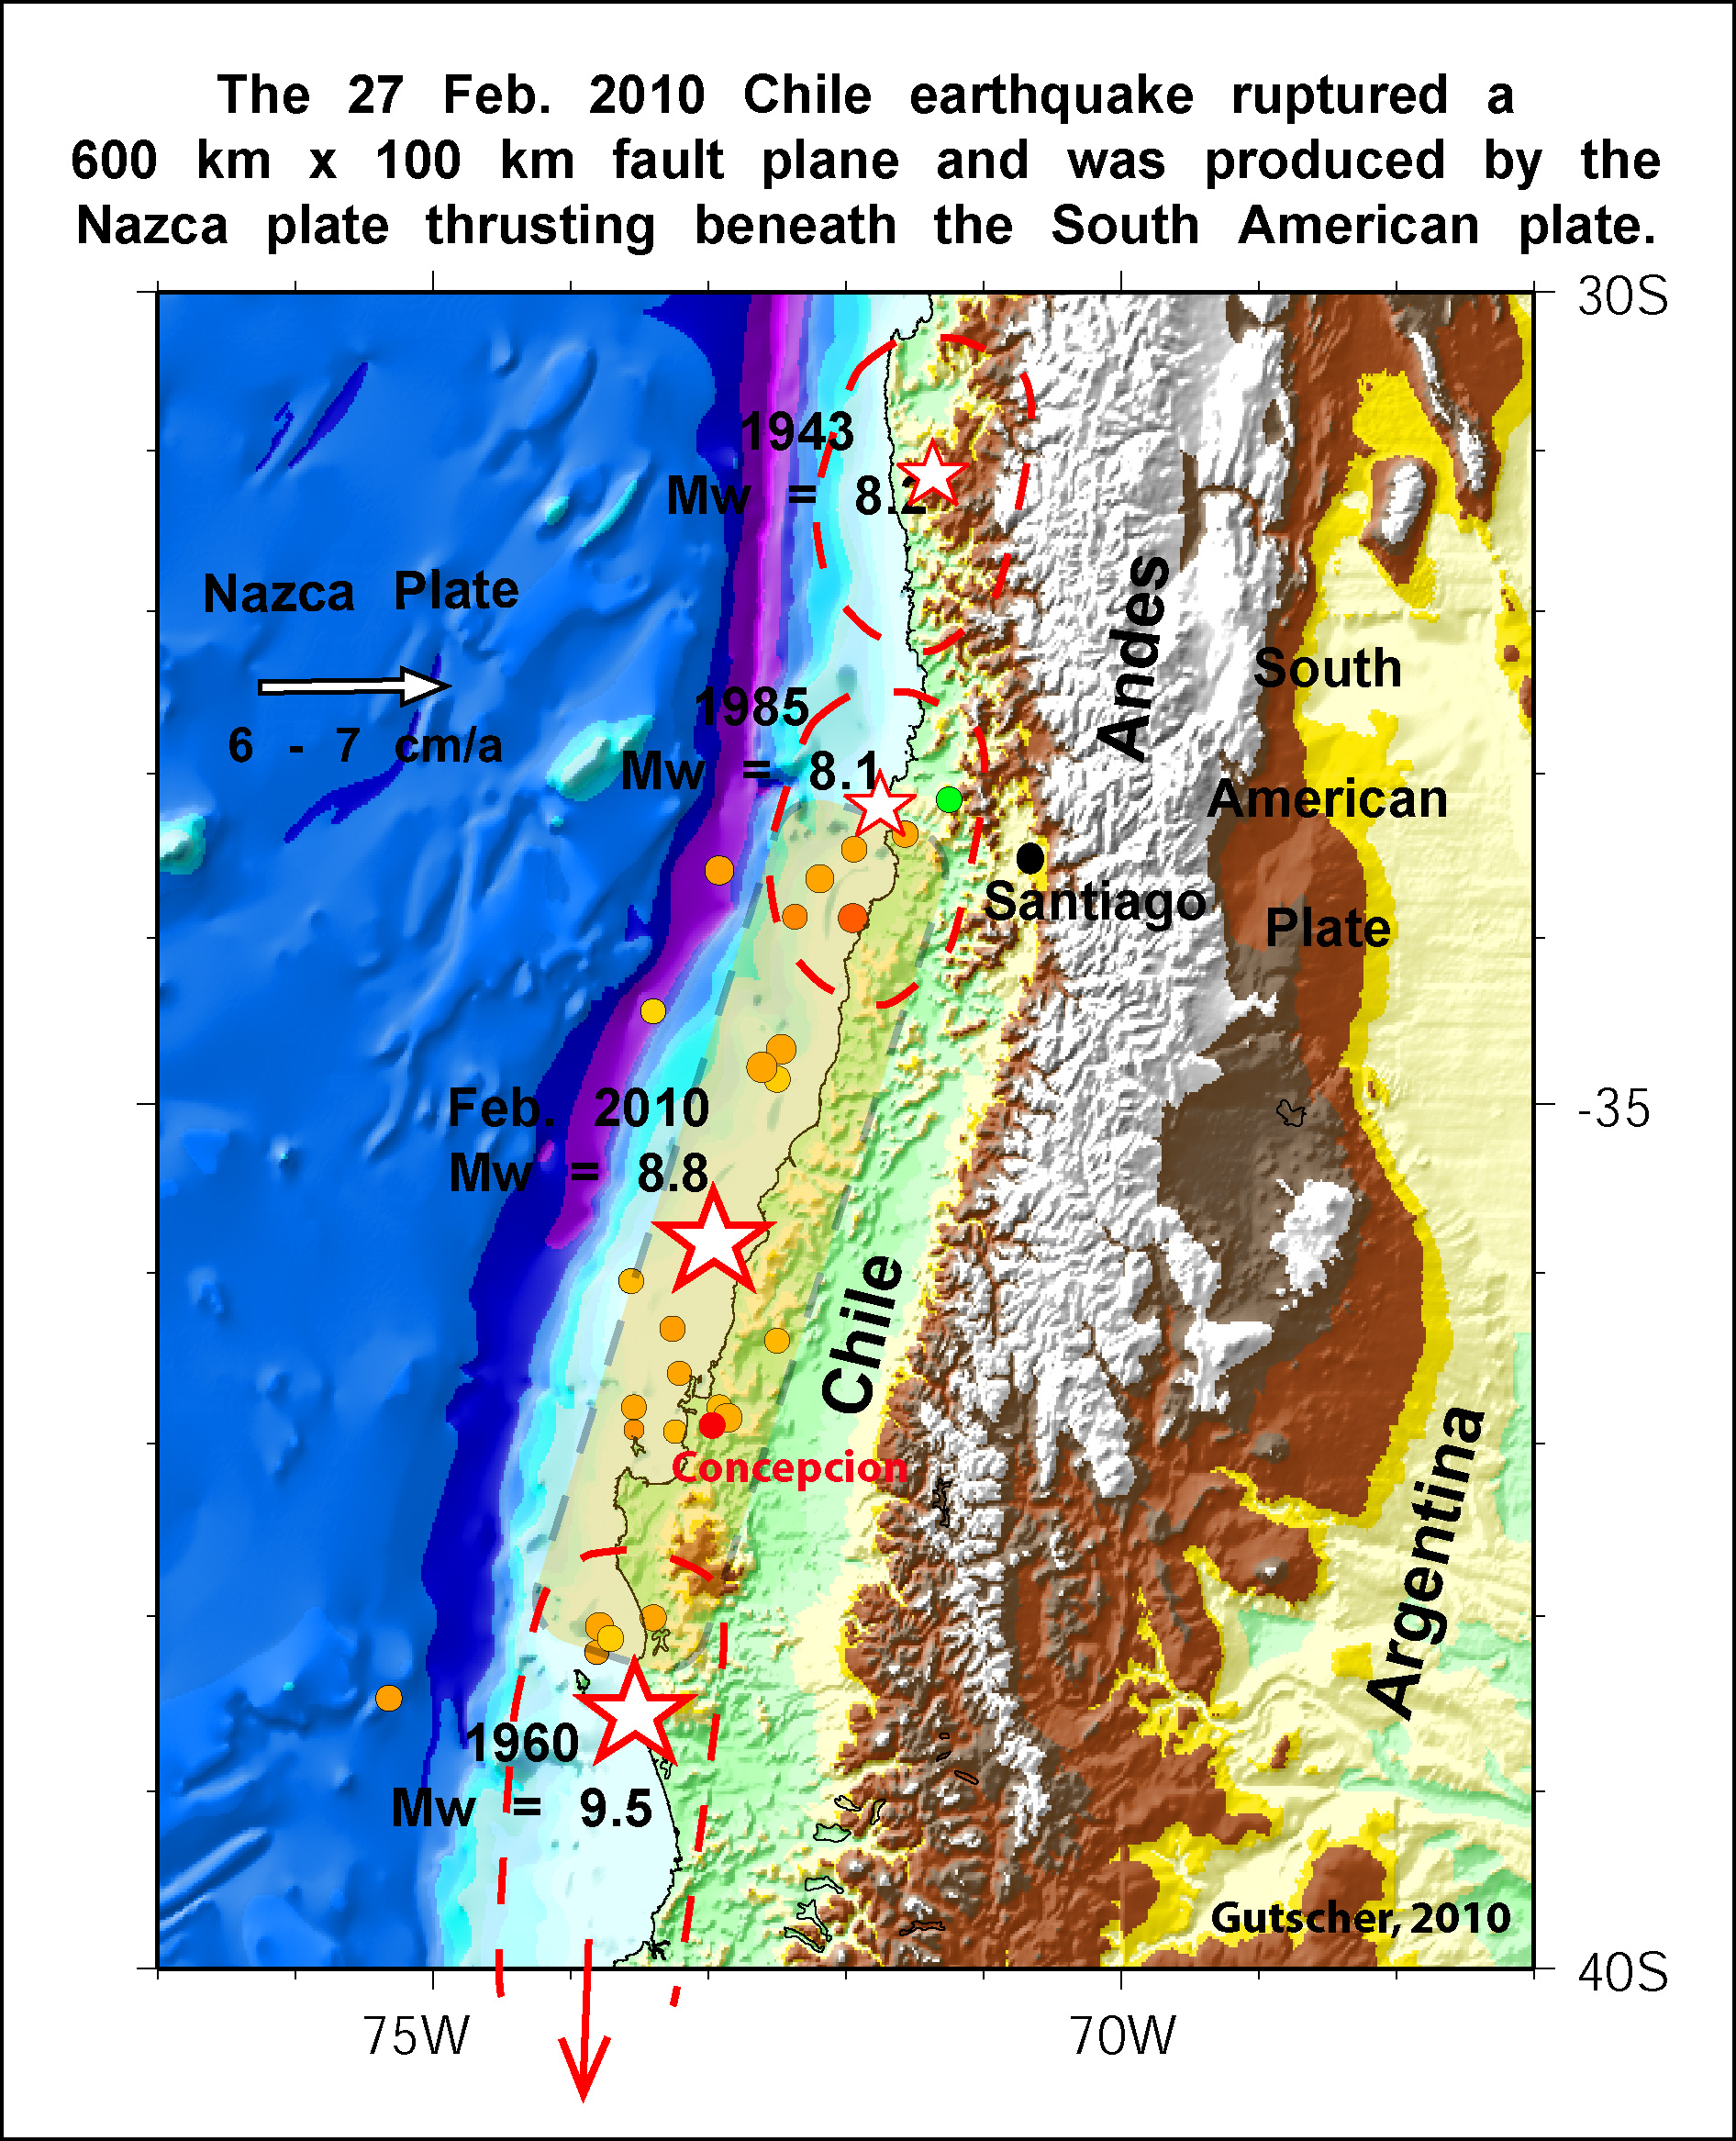 Tectonic environment of the Chile February 27th earthquake